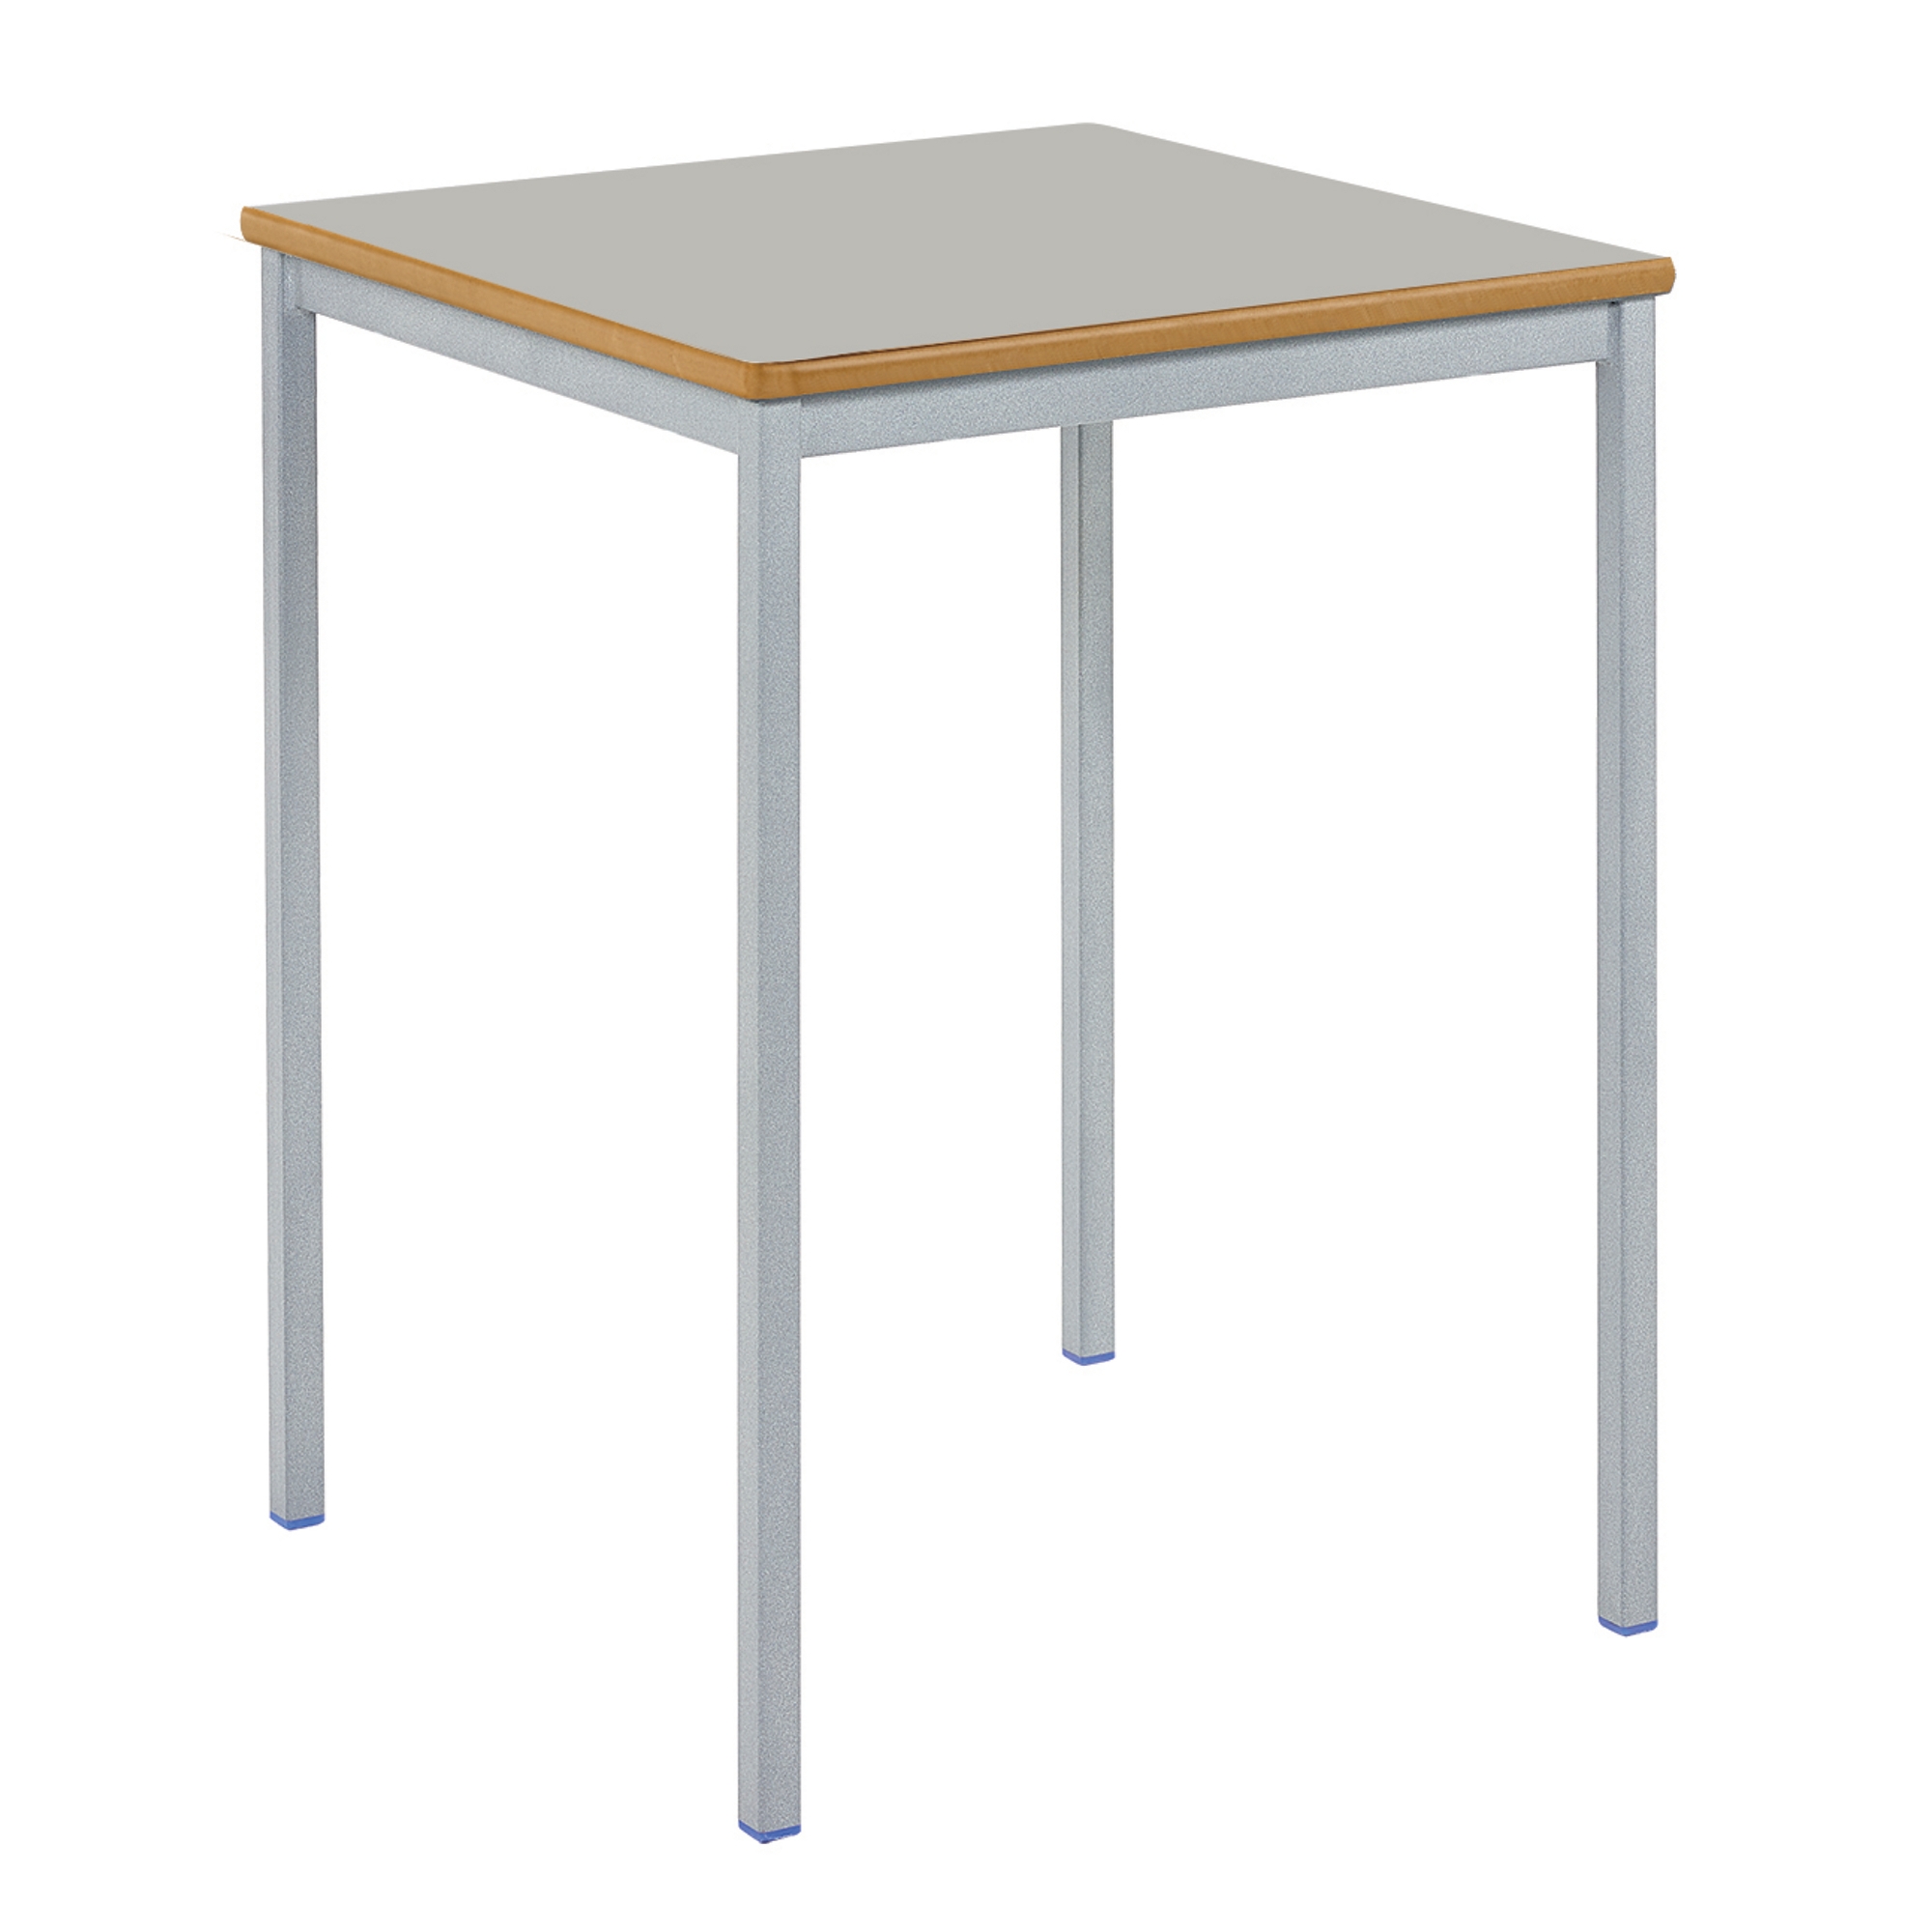 Classmates Square Fully Welded Classroom Table - 600 x 600 x 640mm - Grey